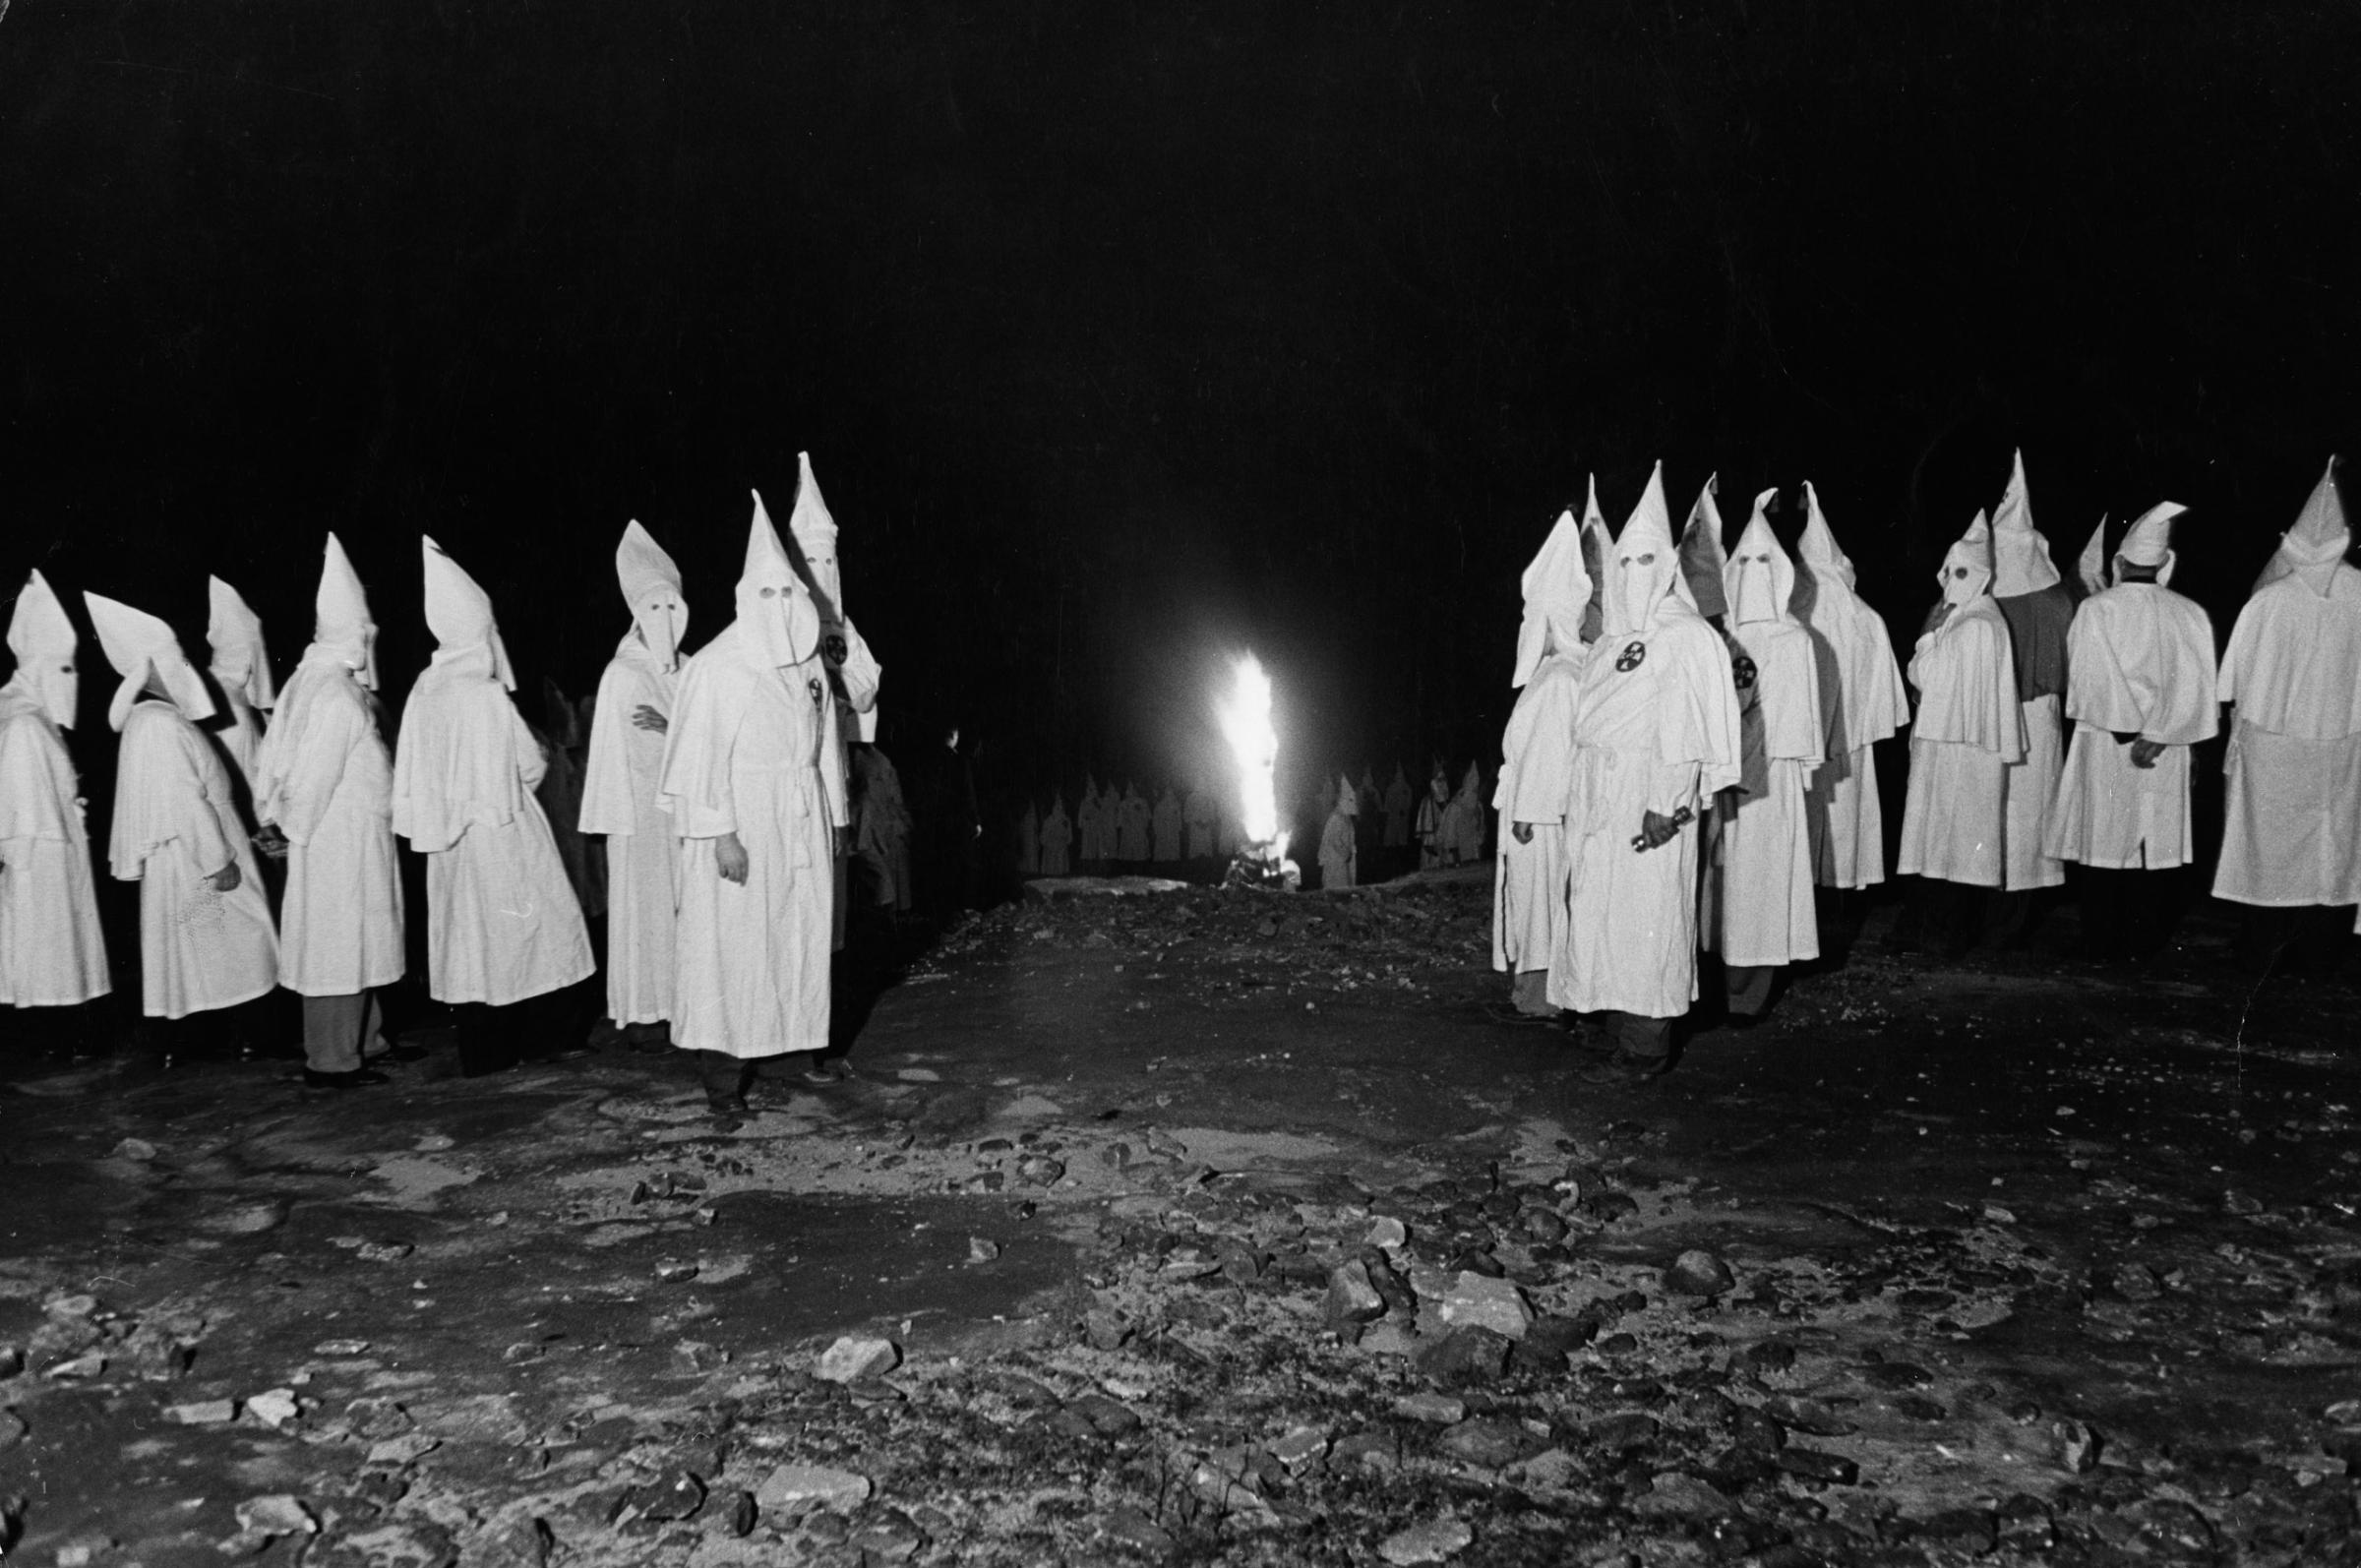 White-sheeted Ku Klux Klan members stand by a burning cross, May 1946. This Stone Mountain, Ga., ceremony was put off many times, Klansmen allegedly said, because of wartime sheet shortages during WWII.